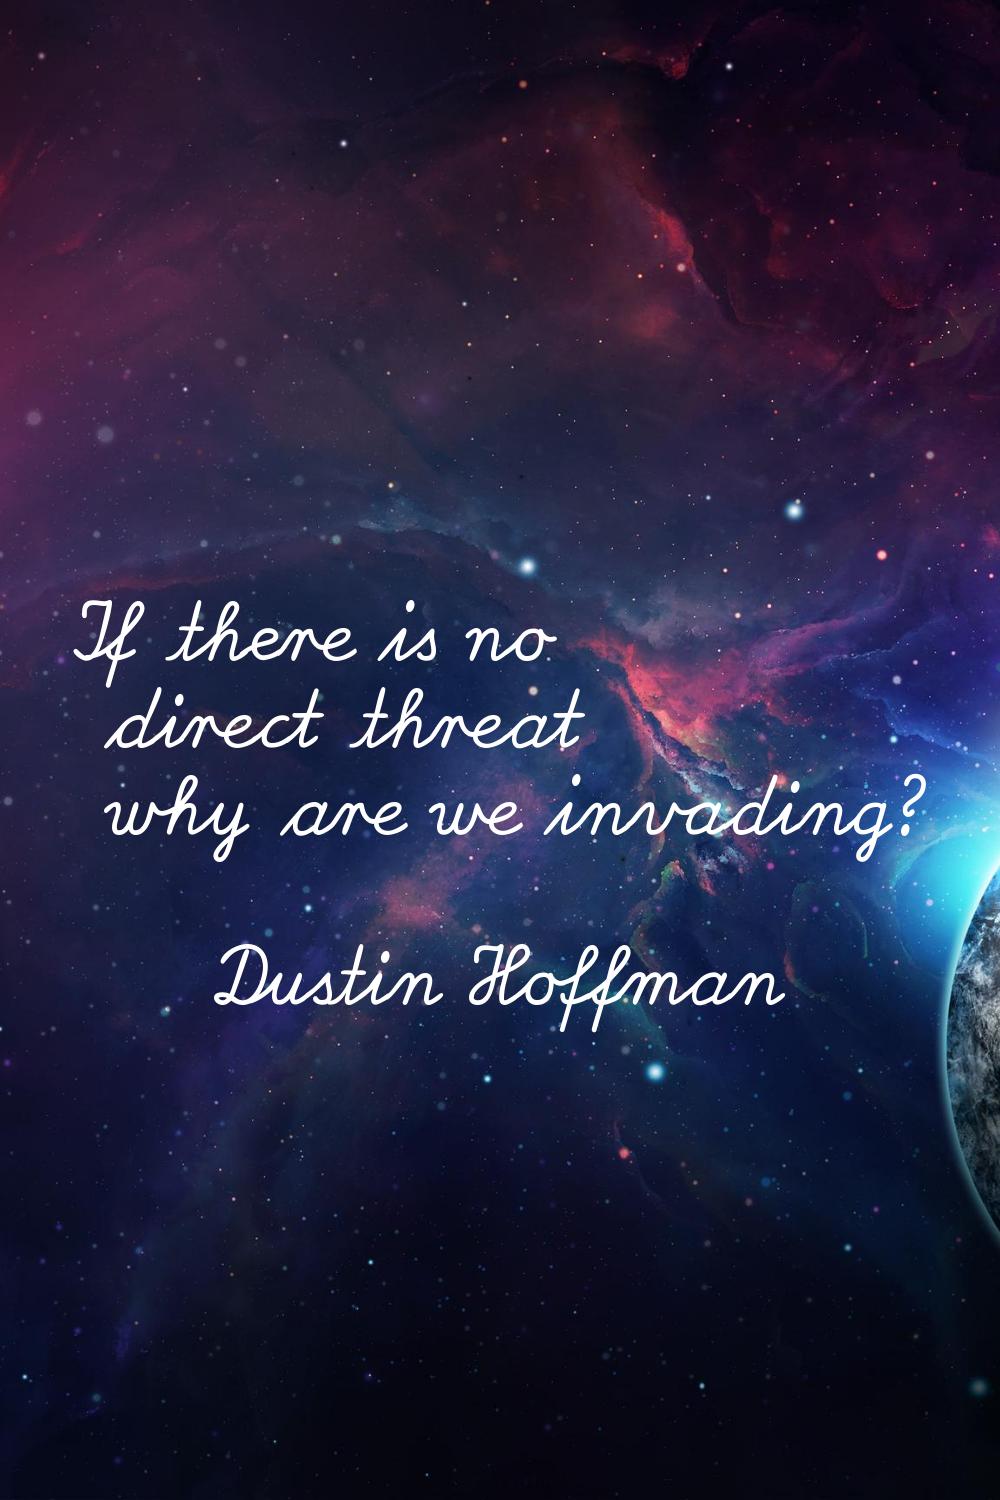 If there is no direct threat why are we invading?